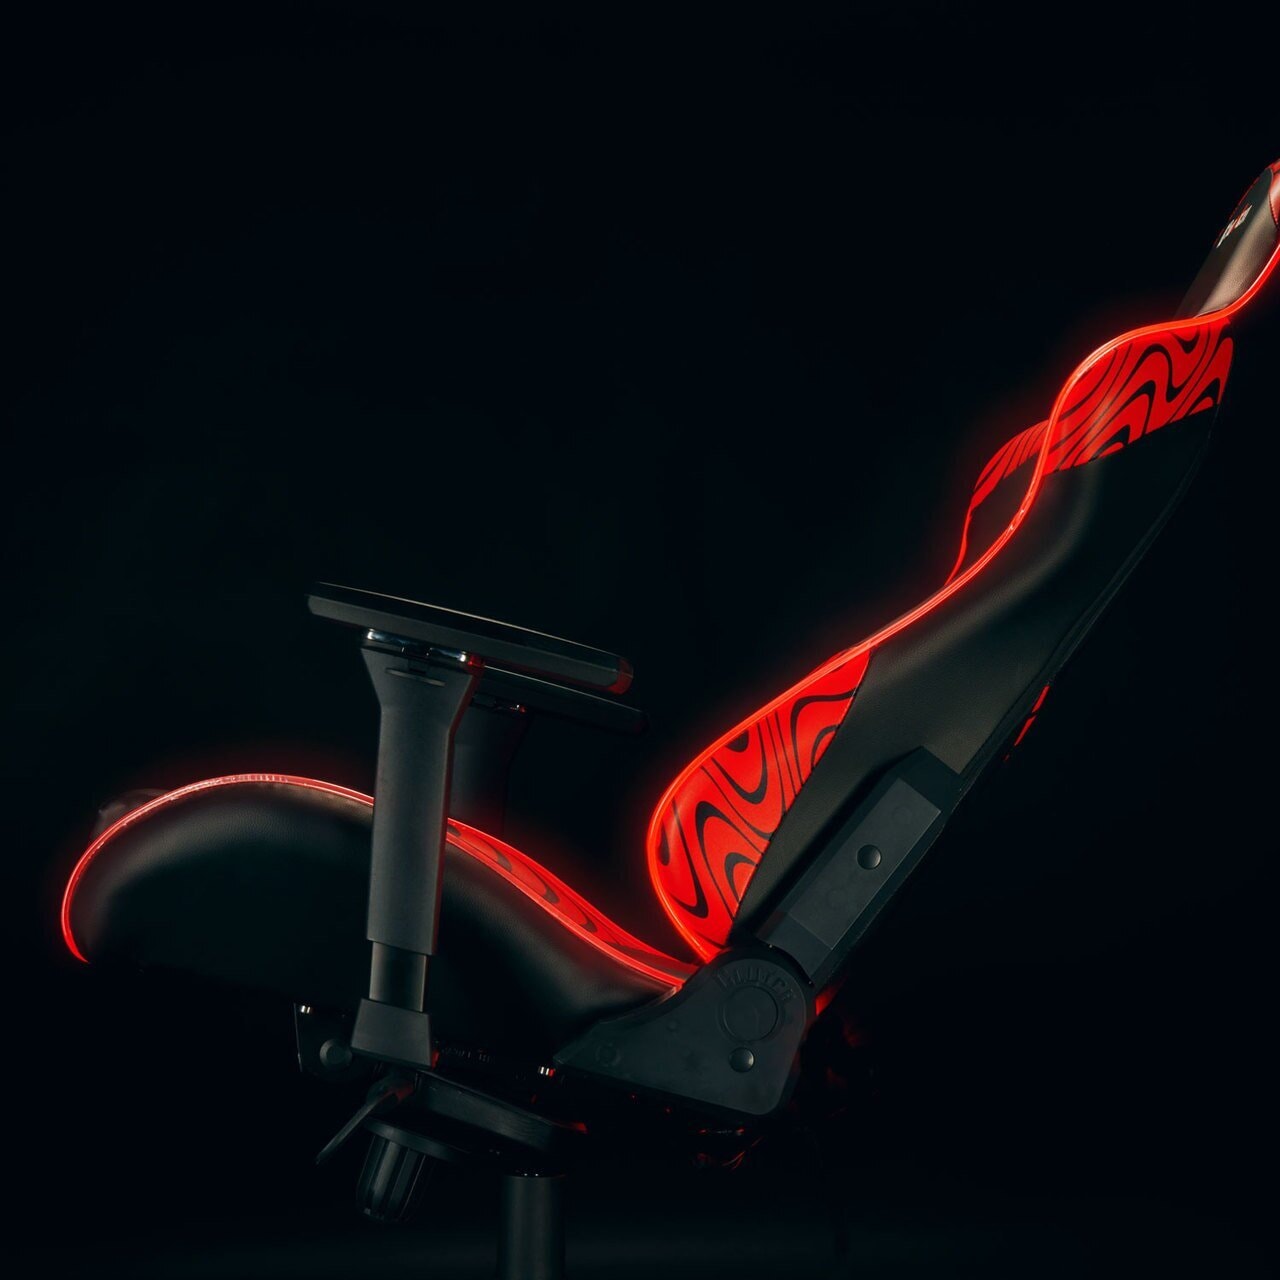 Pewdiepie LED 100 Million Edition Gaming Chair Clutch Chairz 